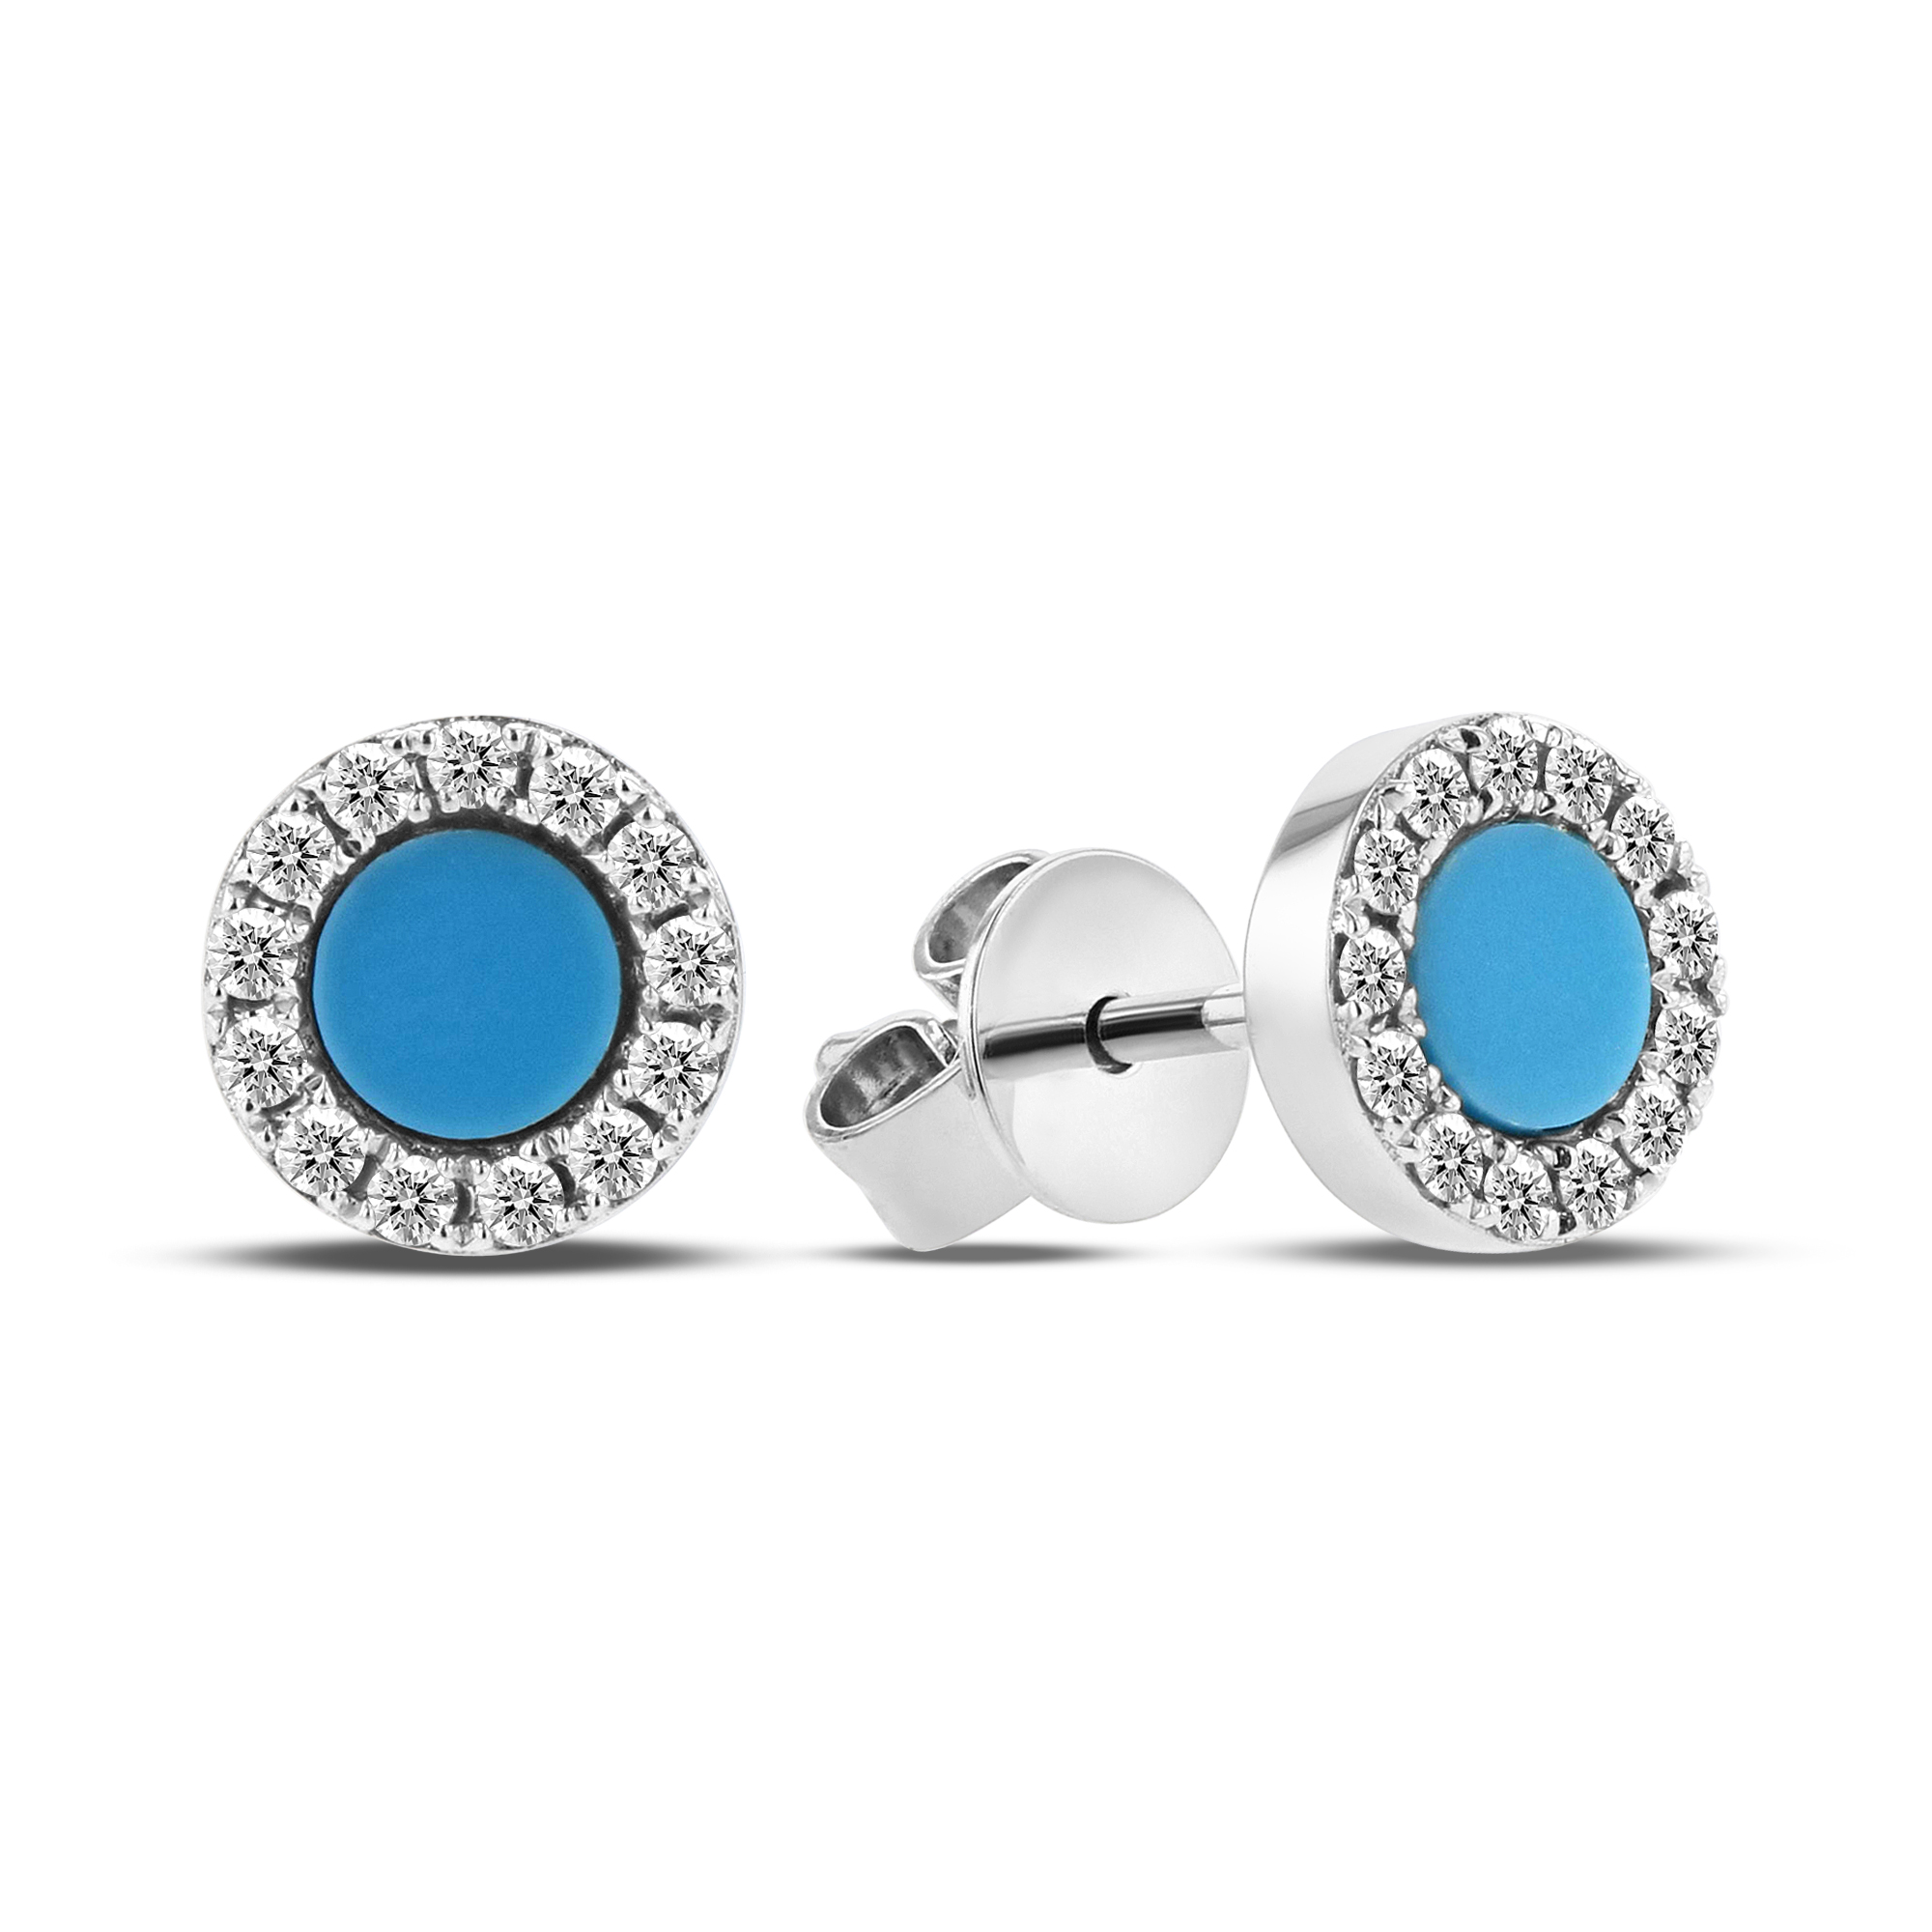 0.16ctw Diamond and Turquoise Earring in 14k White Gold